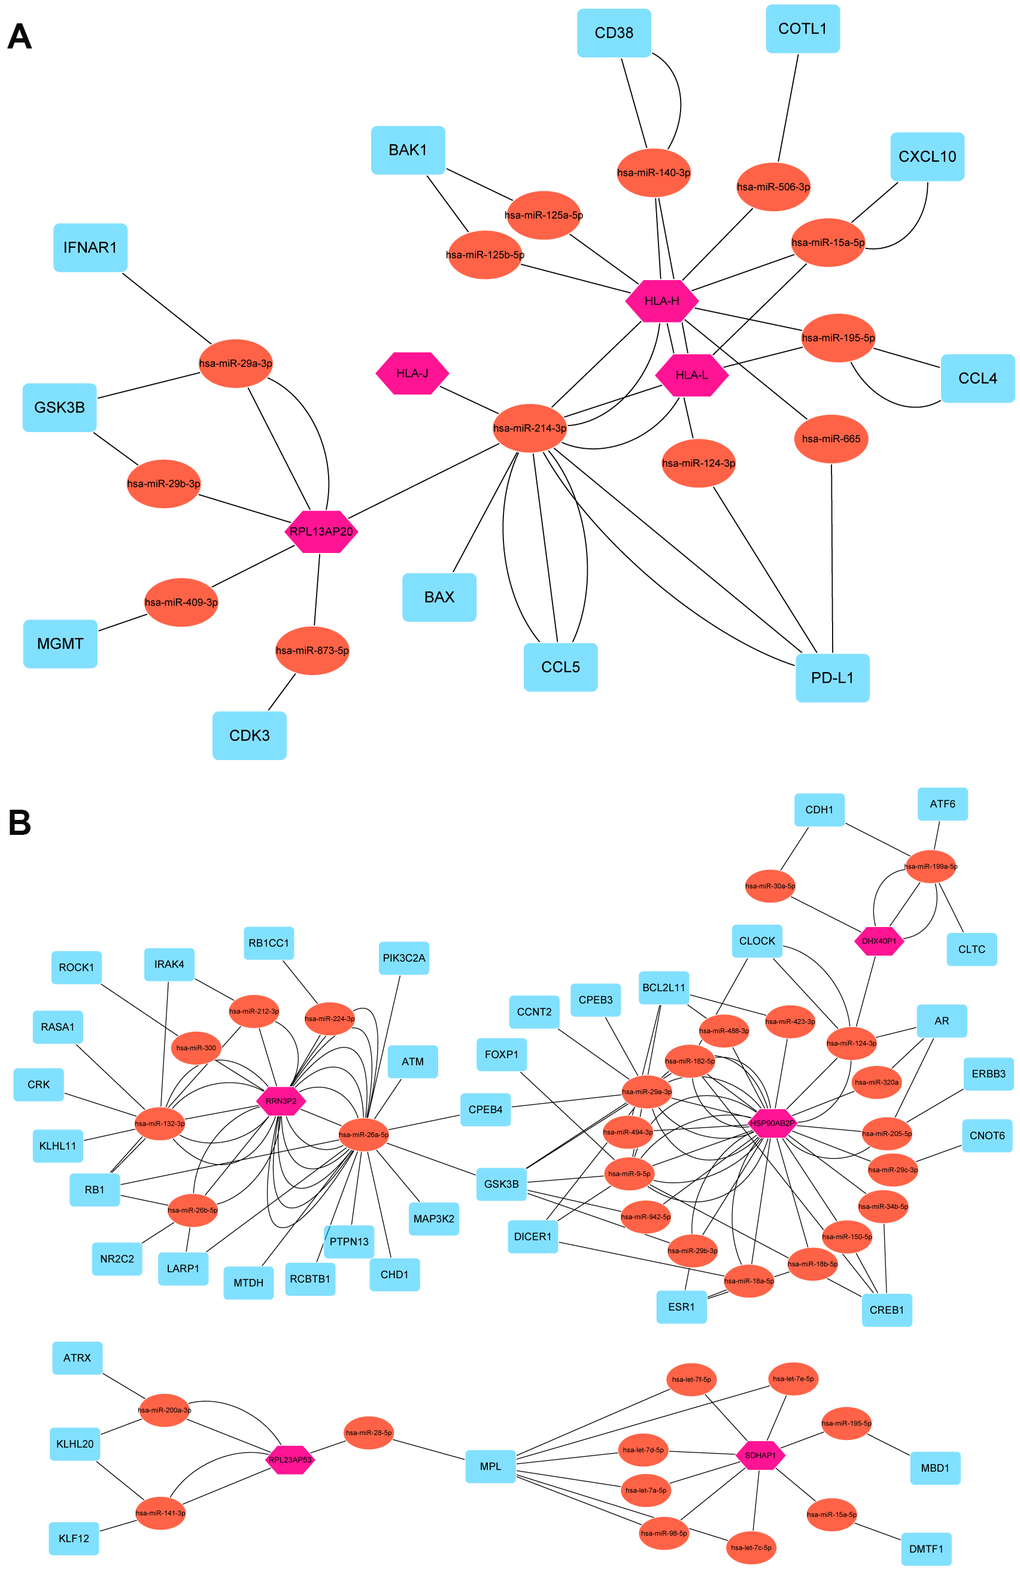 Pseudogene-miRNA-target gene regulatory networks. Nine pseudogenes together with binding miRNAs and target genes with |r| ≥ 0.3 and P A) and oncogene pseudogenes (B). Pink hexagons represented pseudogenes, which are located at the cores of the networks. Tomato ellipses and blue round rectangles stand for binding miRNAs and target genes, respectively.